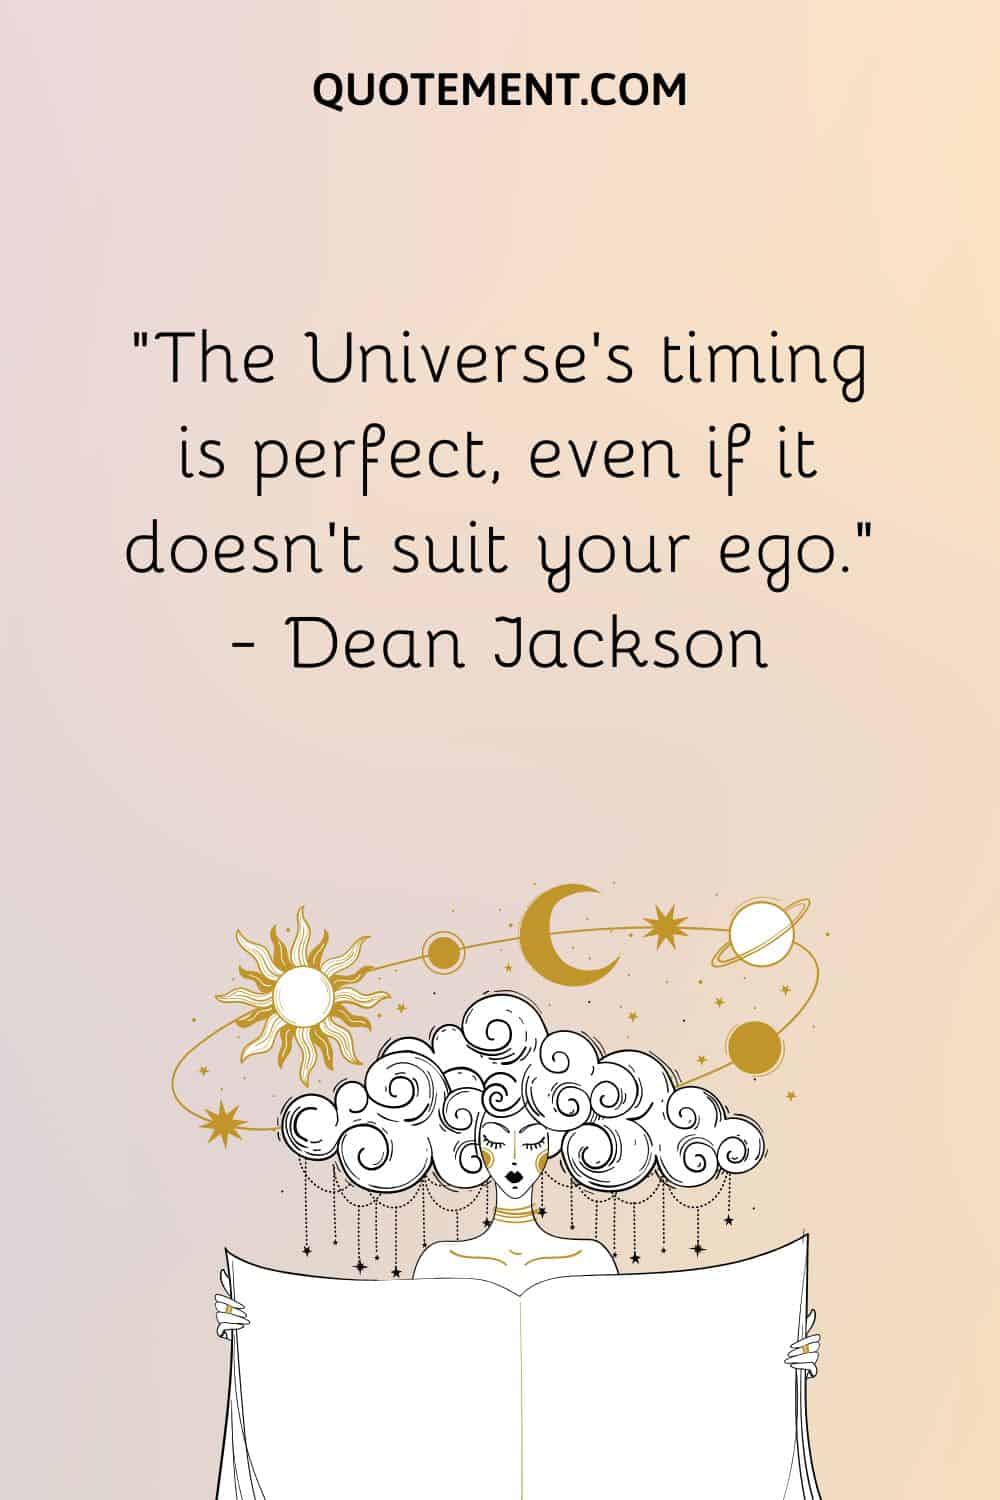 The Universe’s timing is perfect, even if it doesn’t suit your ego